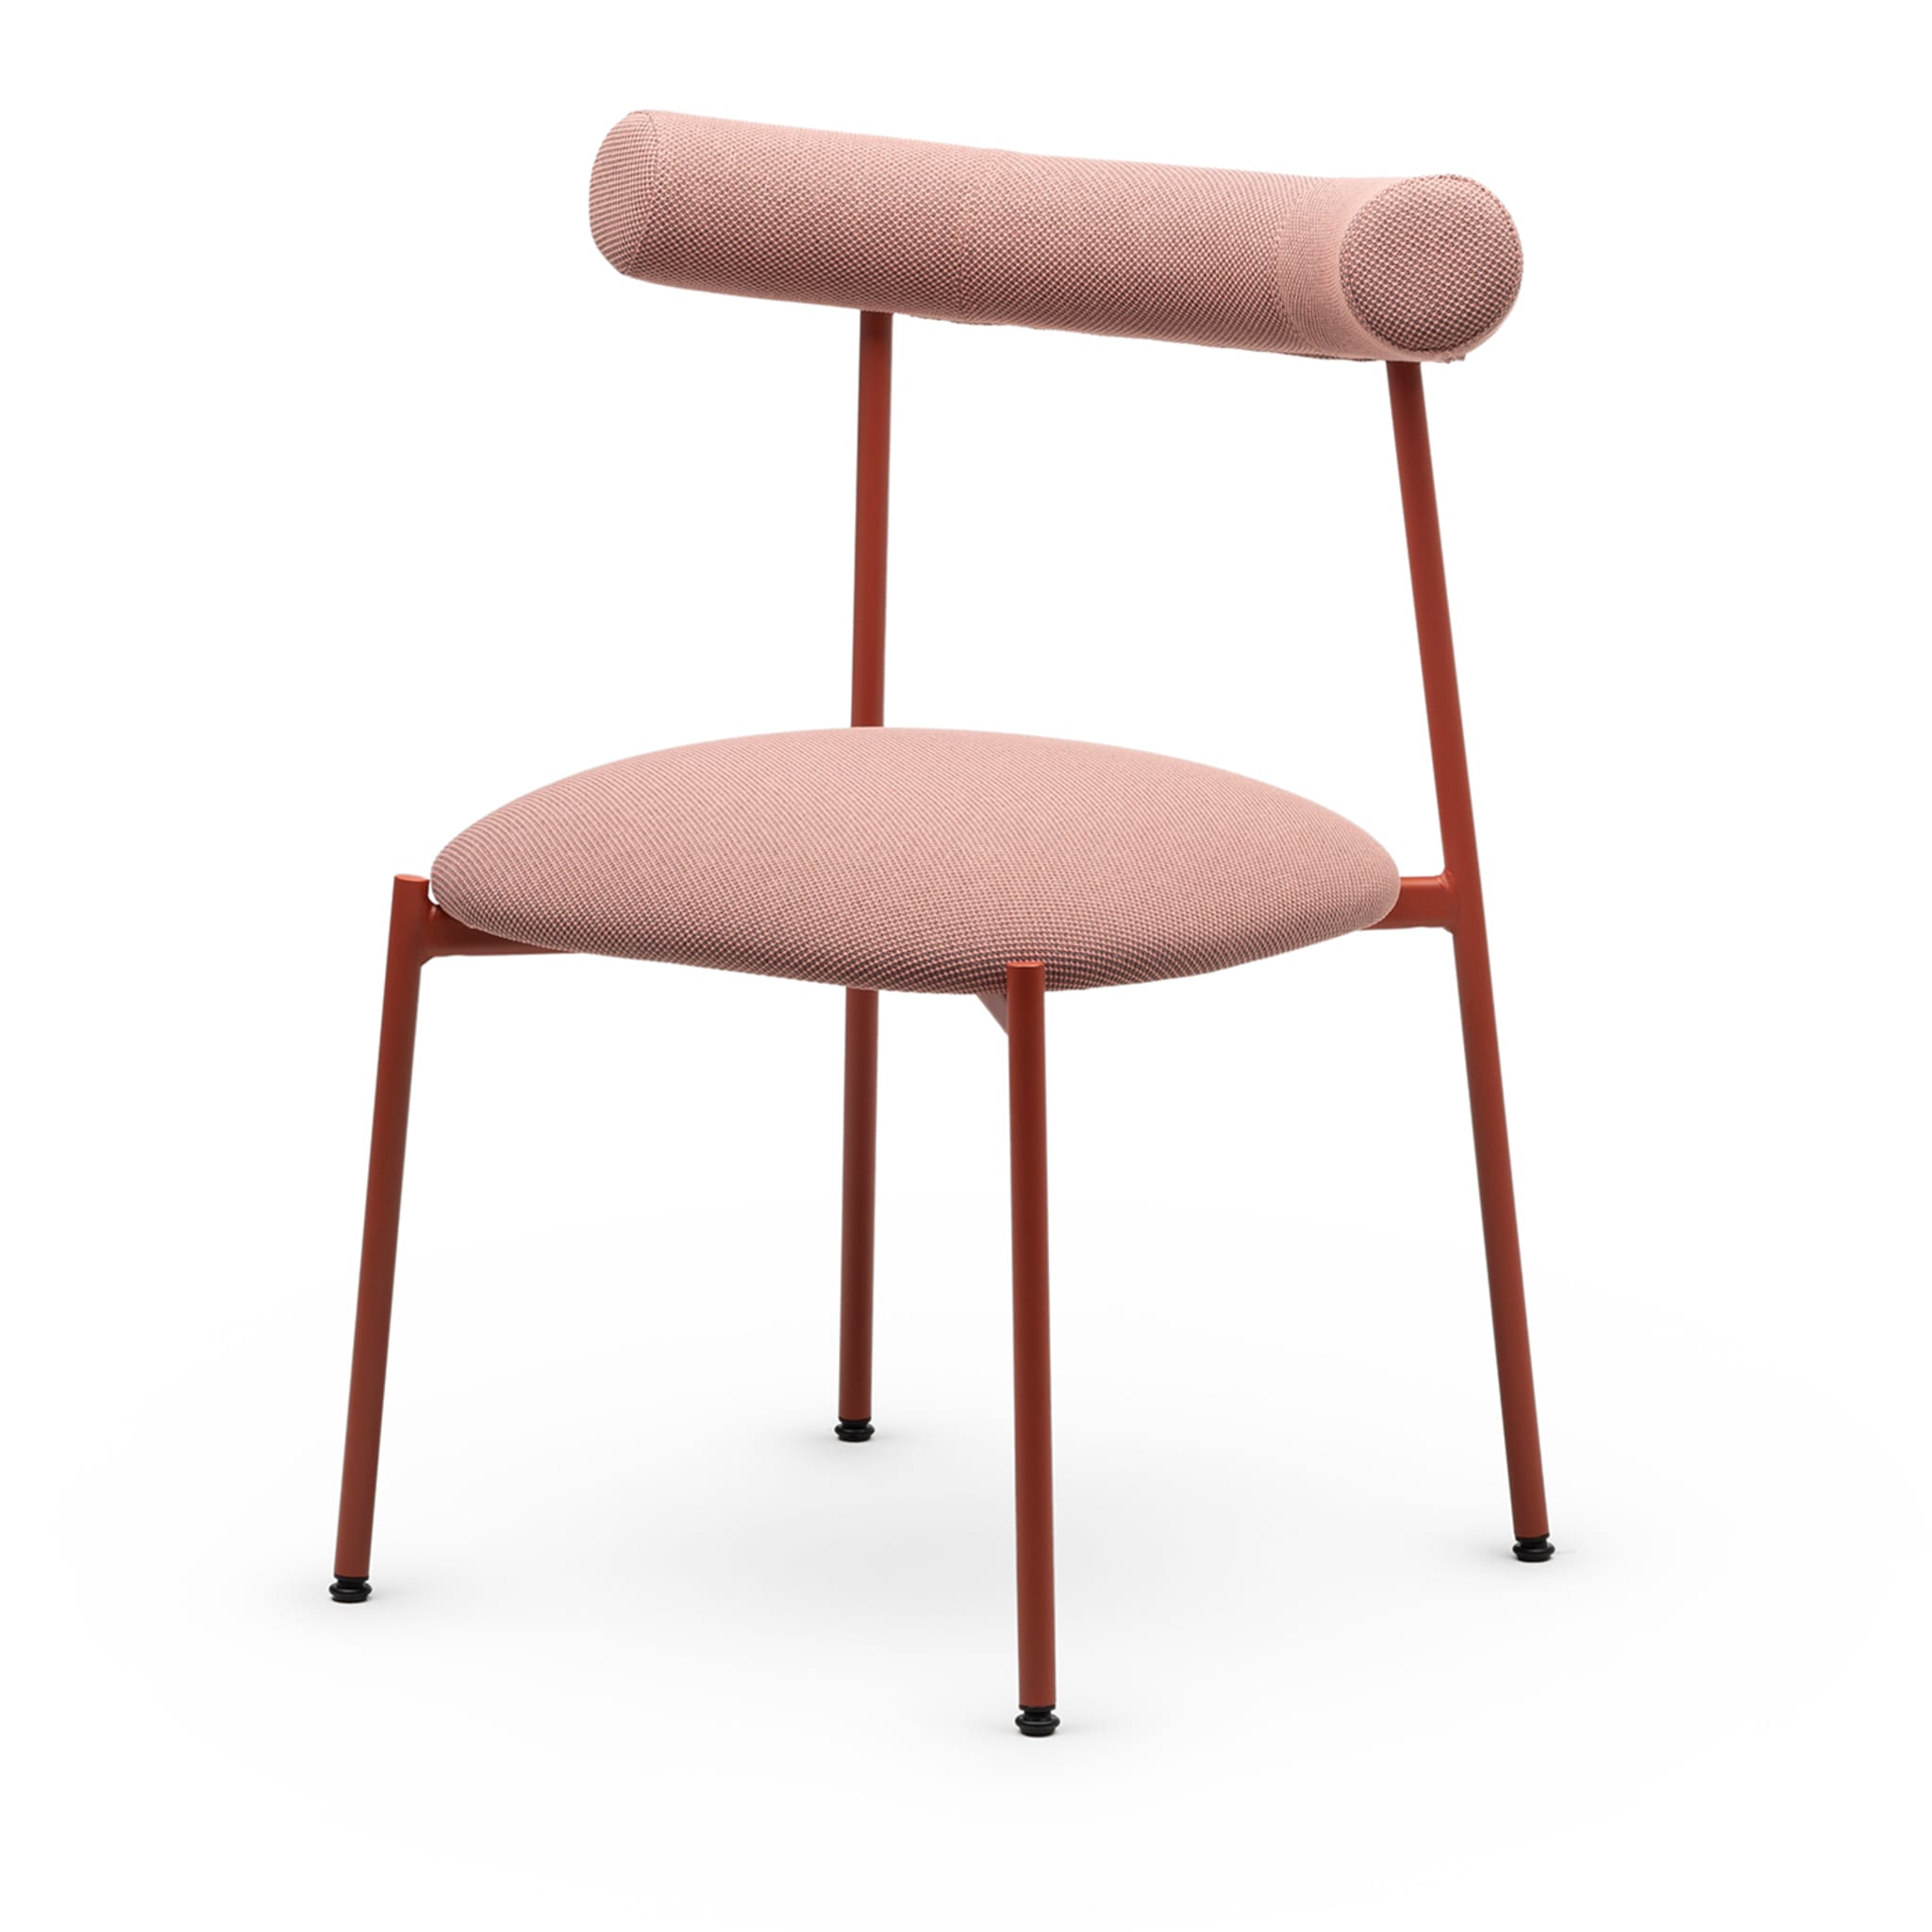 Pampa S Pink & Brick-Red Chair by Studio Pastina - Alternative view 1